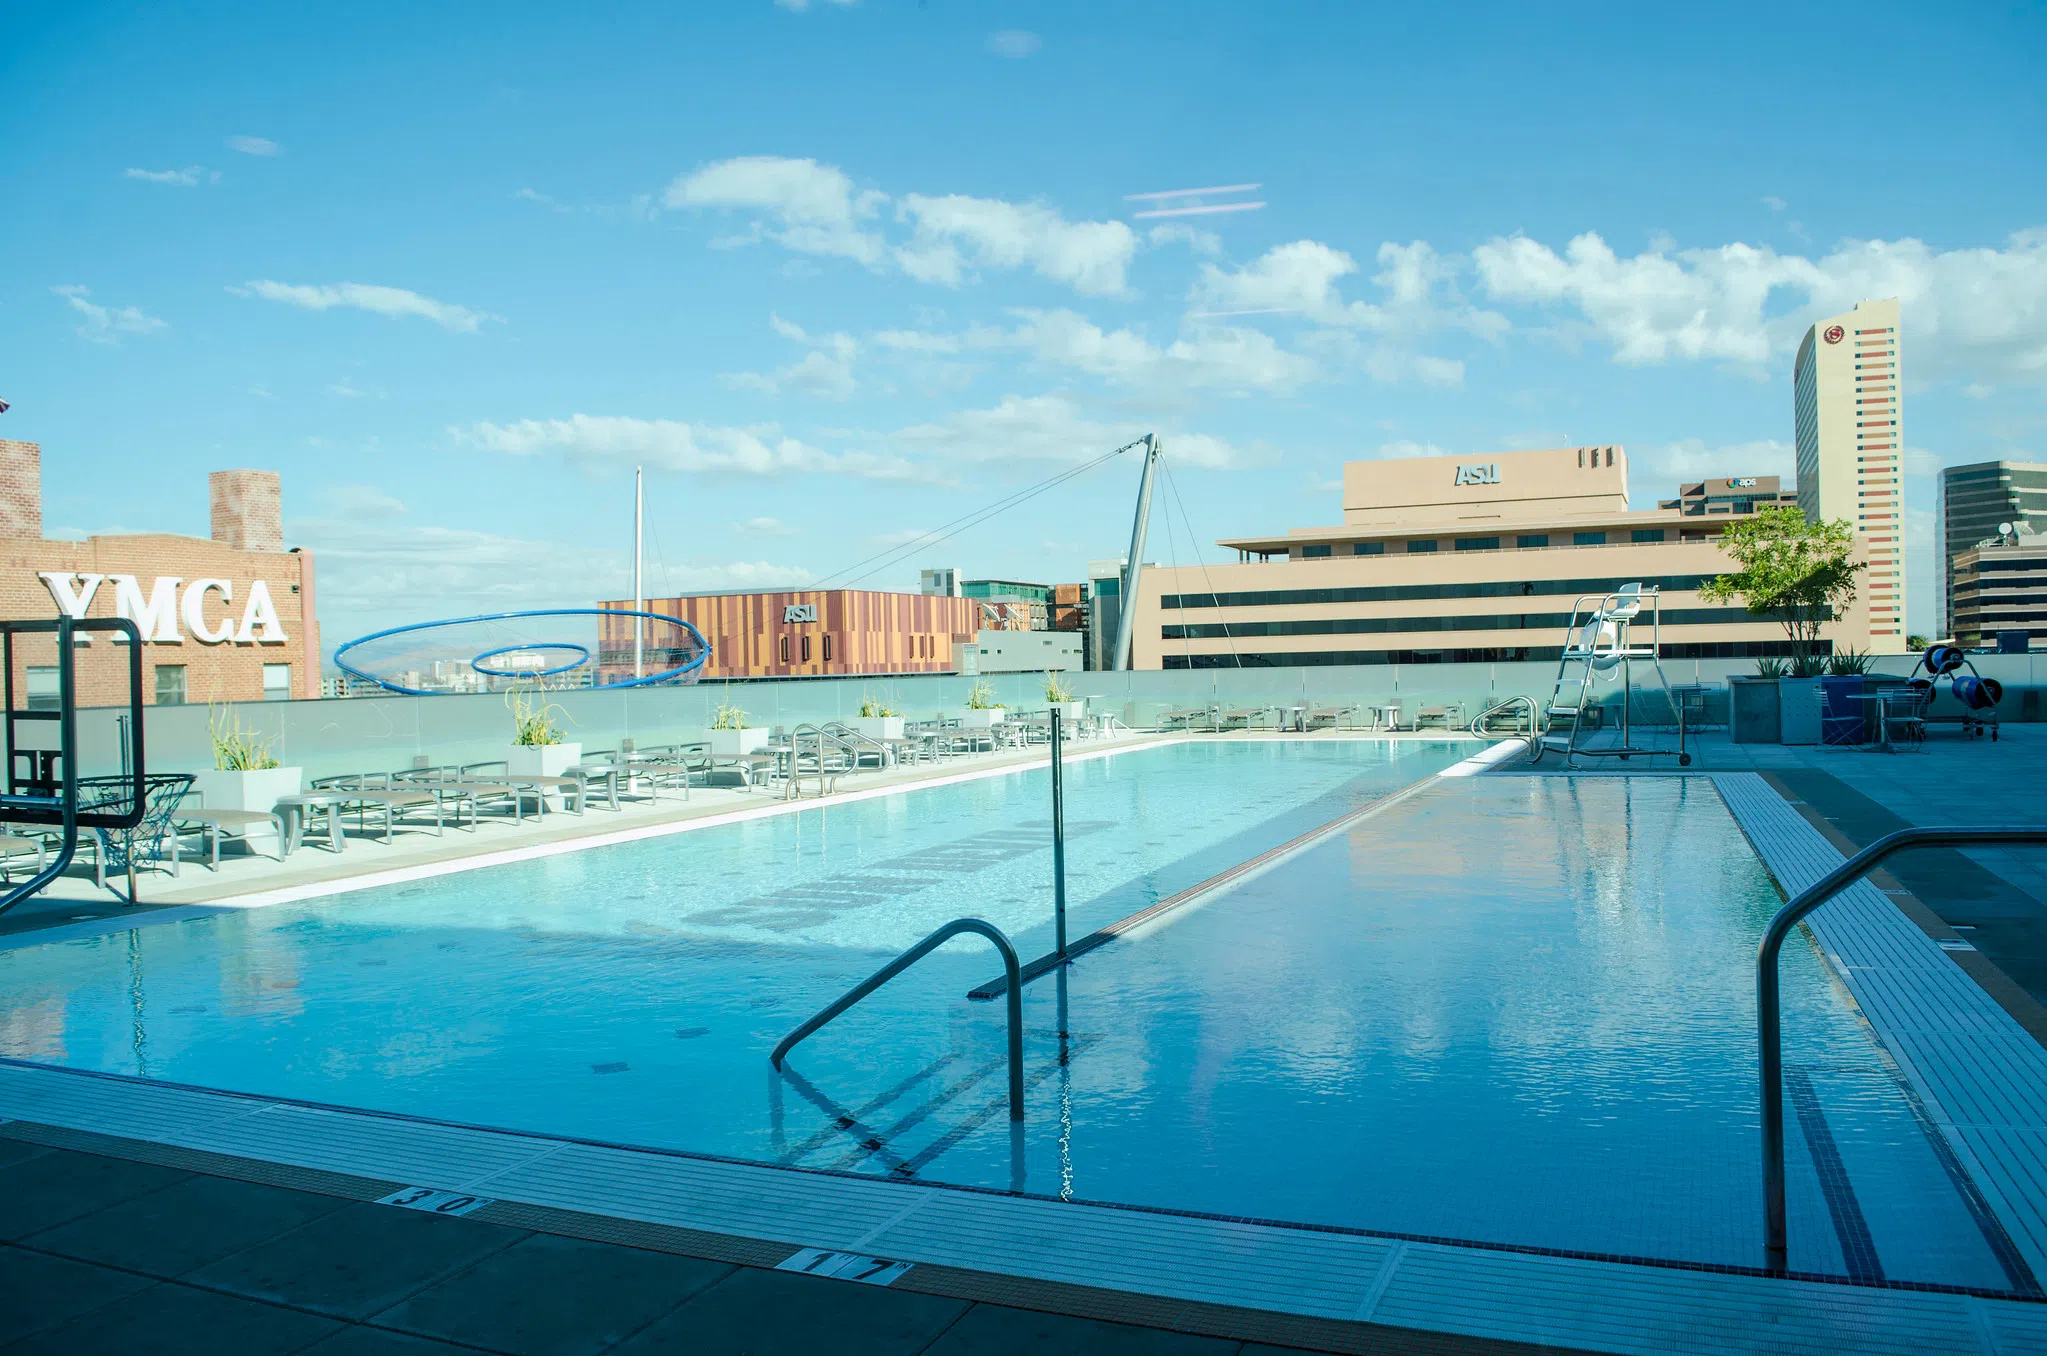 Rooftop pool and view of campus beyond it. 